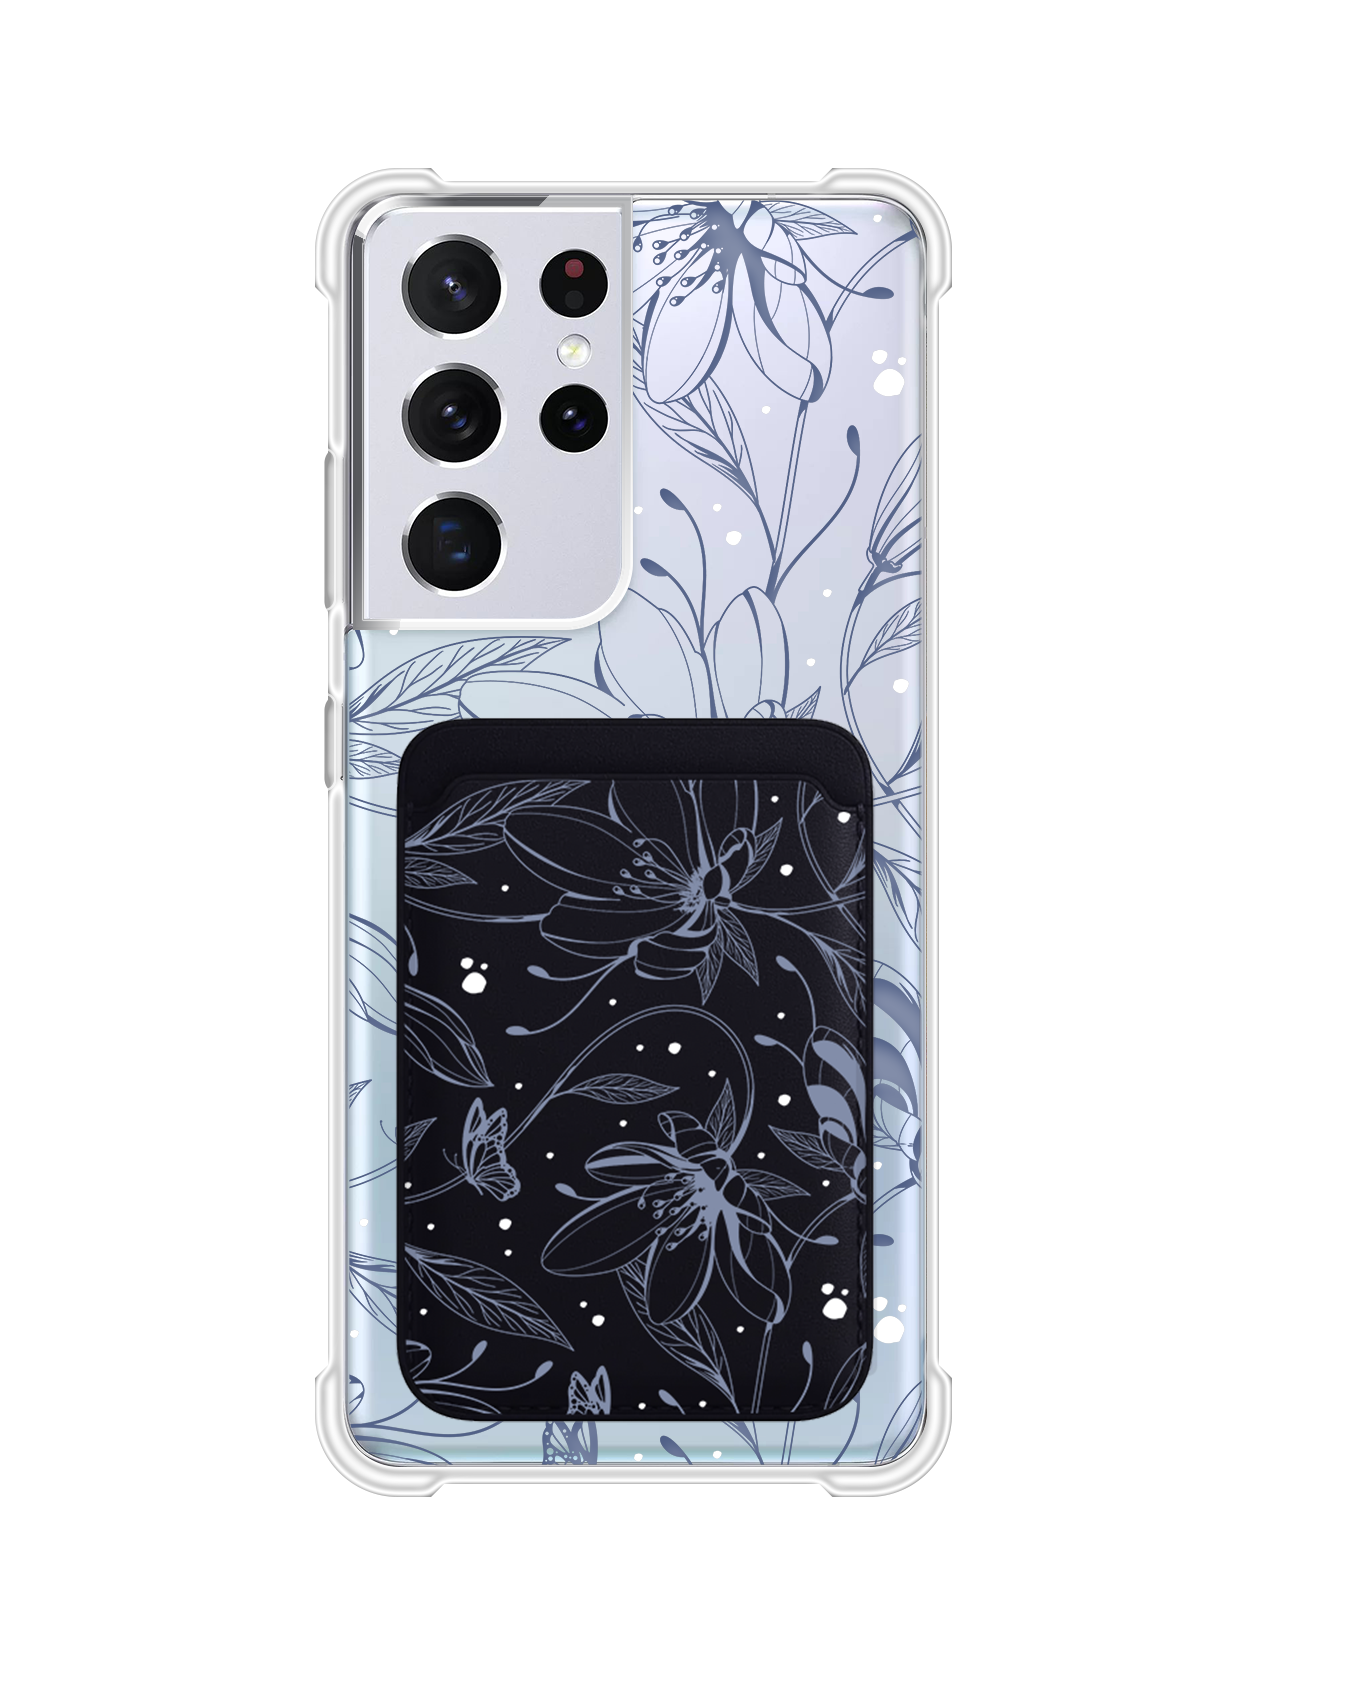 Android Magnetic Wallet Case - Sketchy Flower & Butterfly 2.0